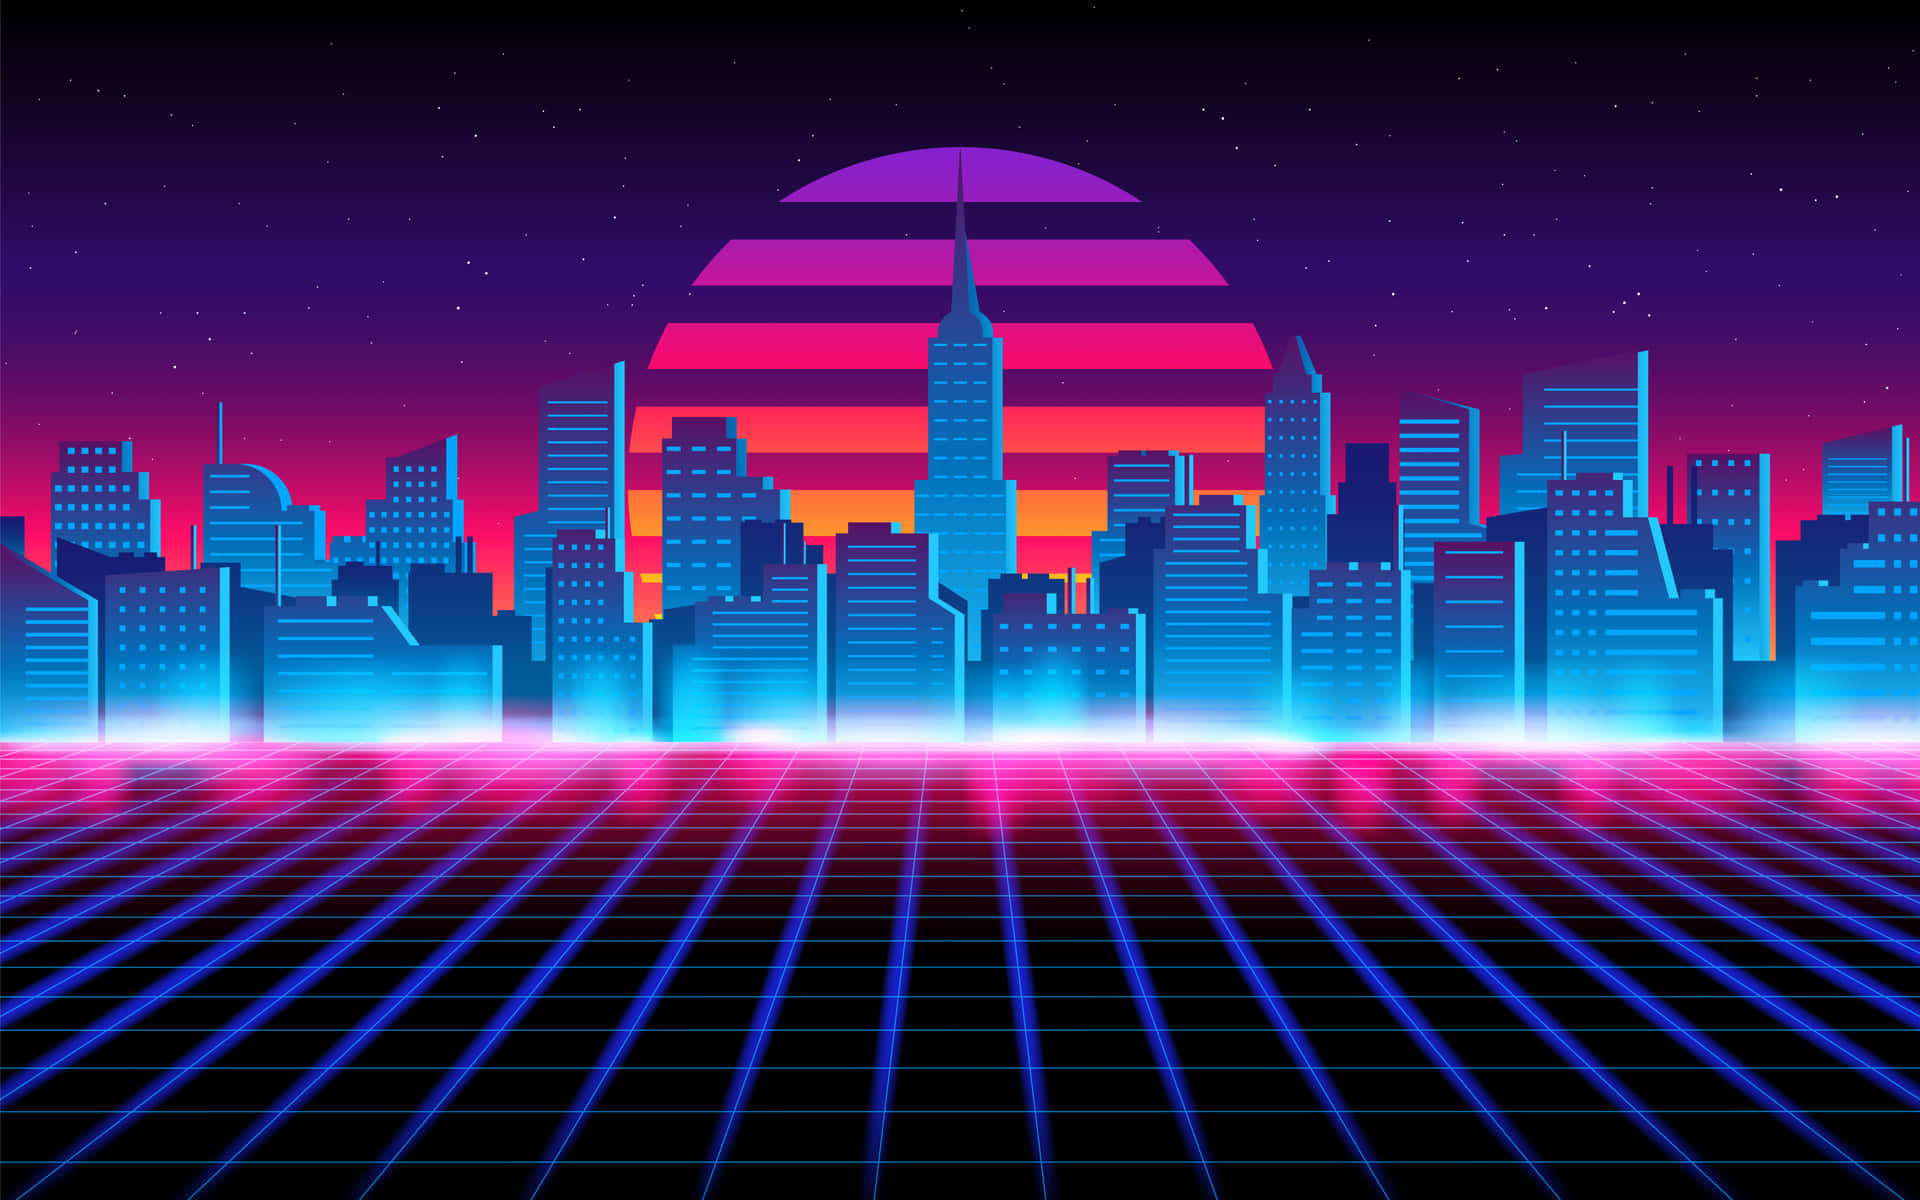 Welcome to the Futuristic City